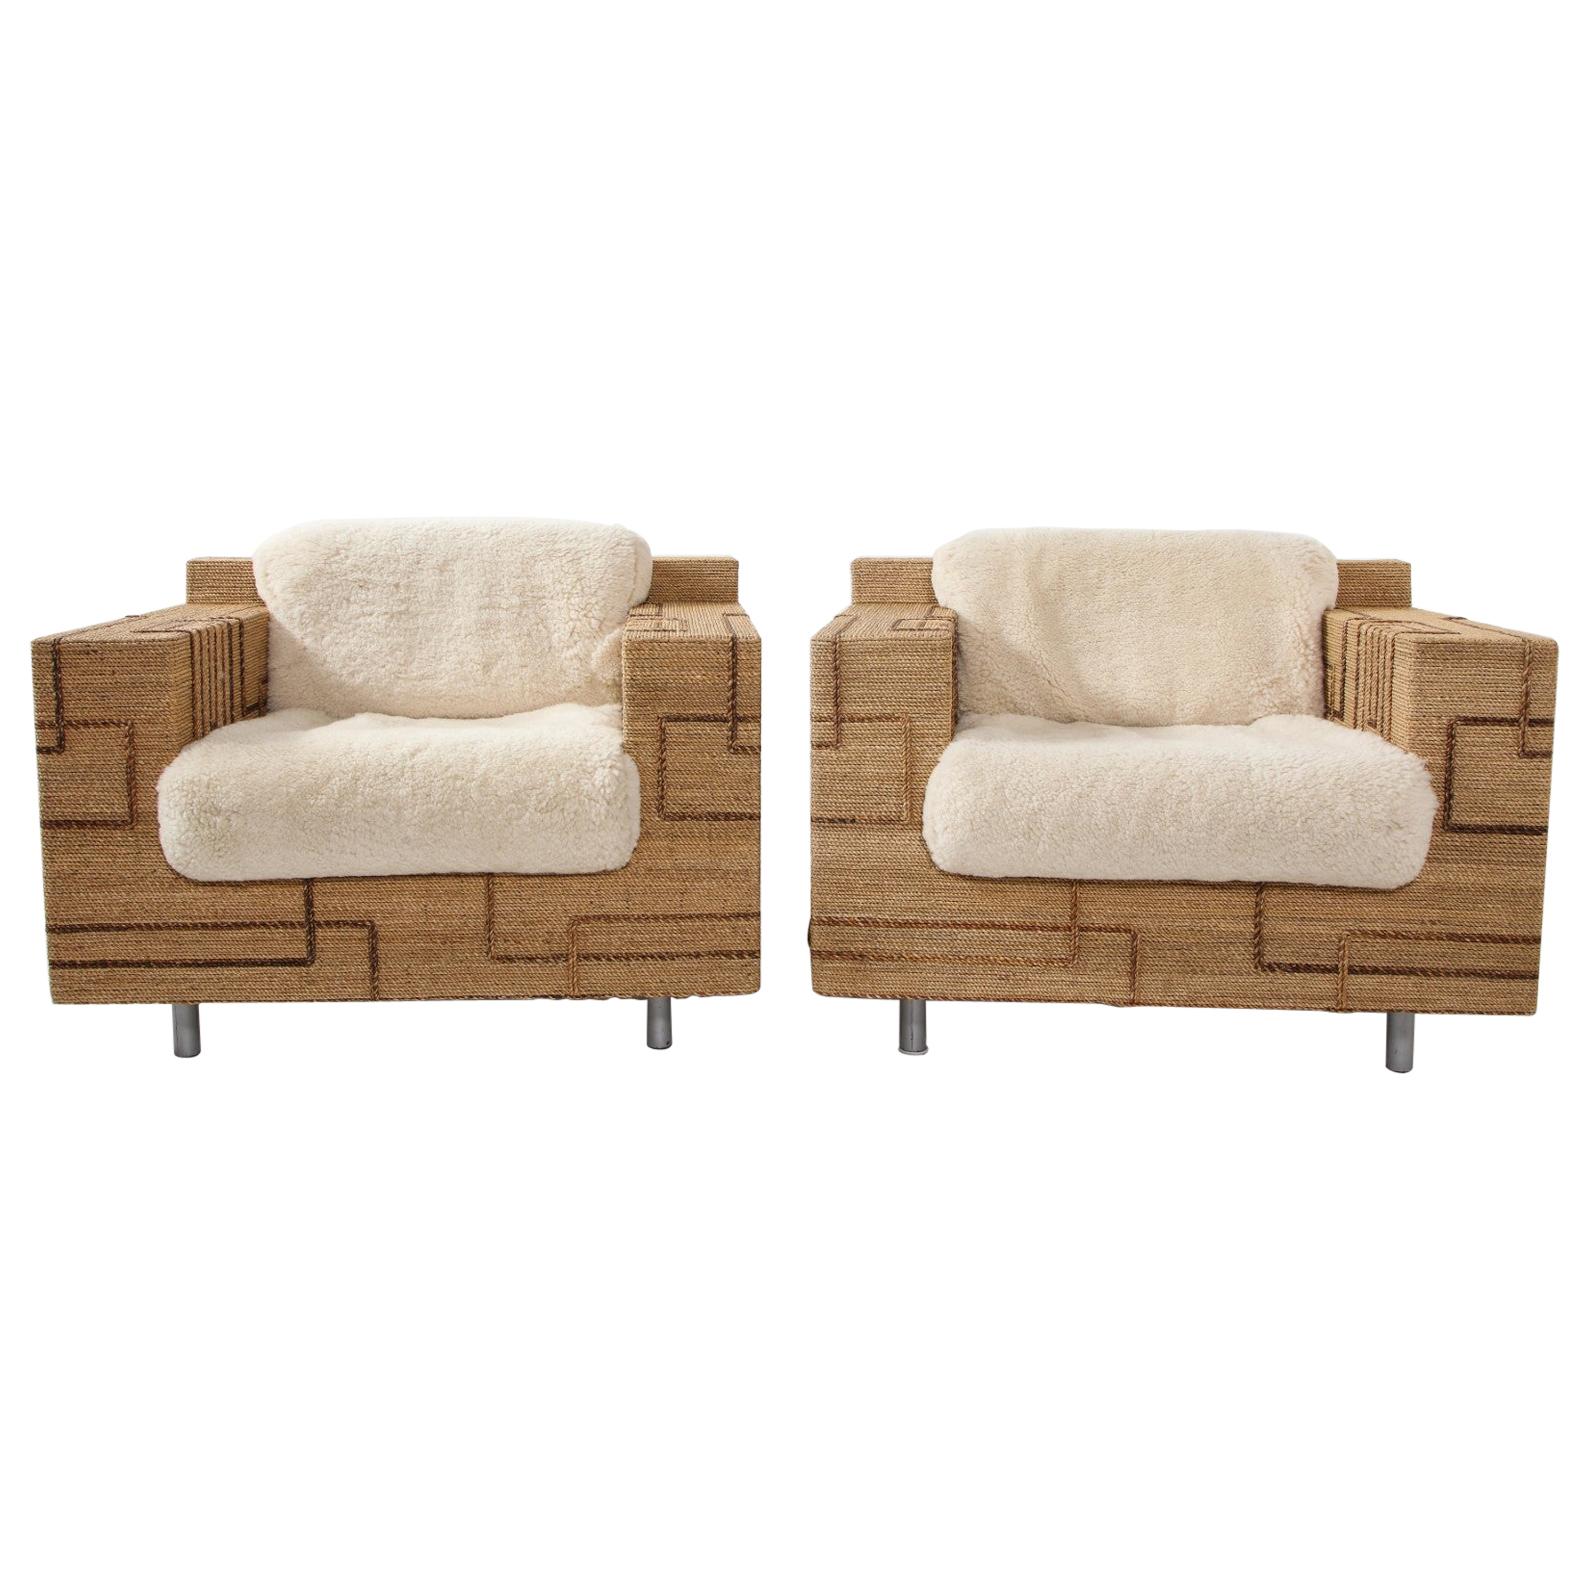 Pair of Italian 1970s Rope-Inlaid Lounge Chairs with New Shearling Cushions